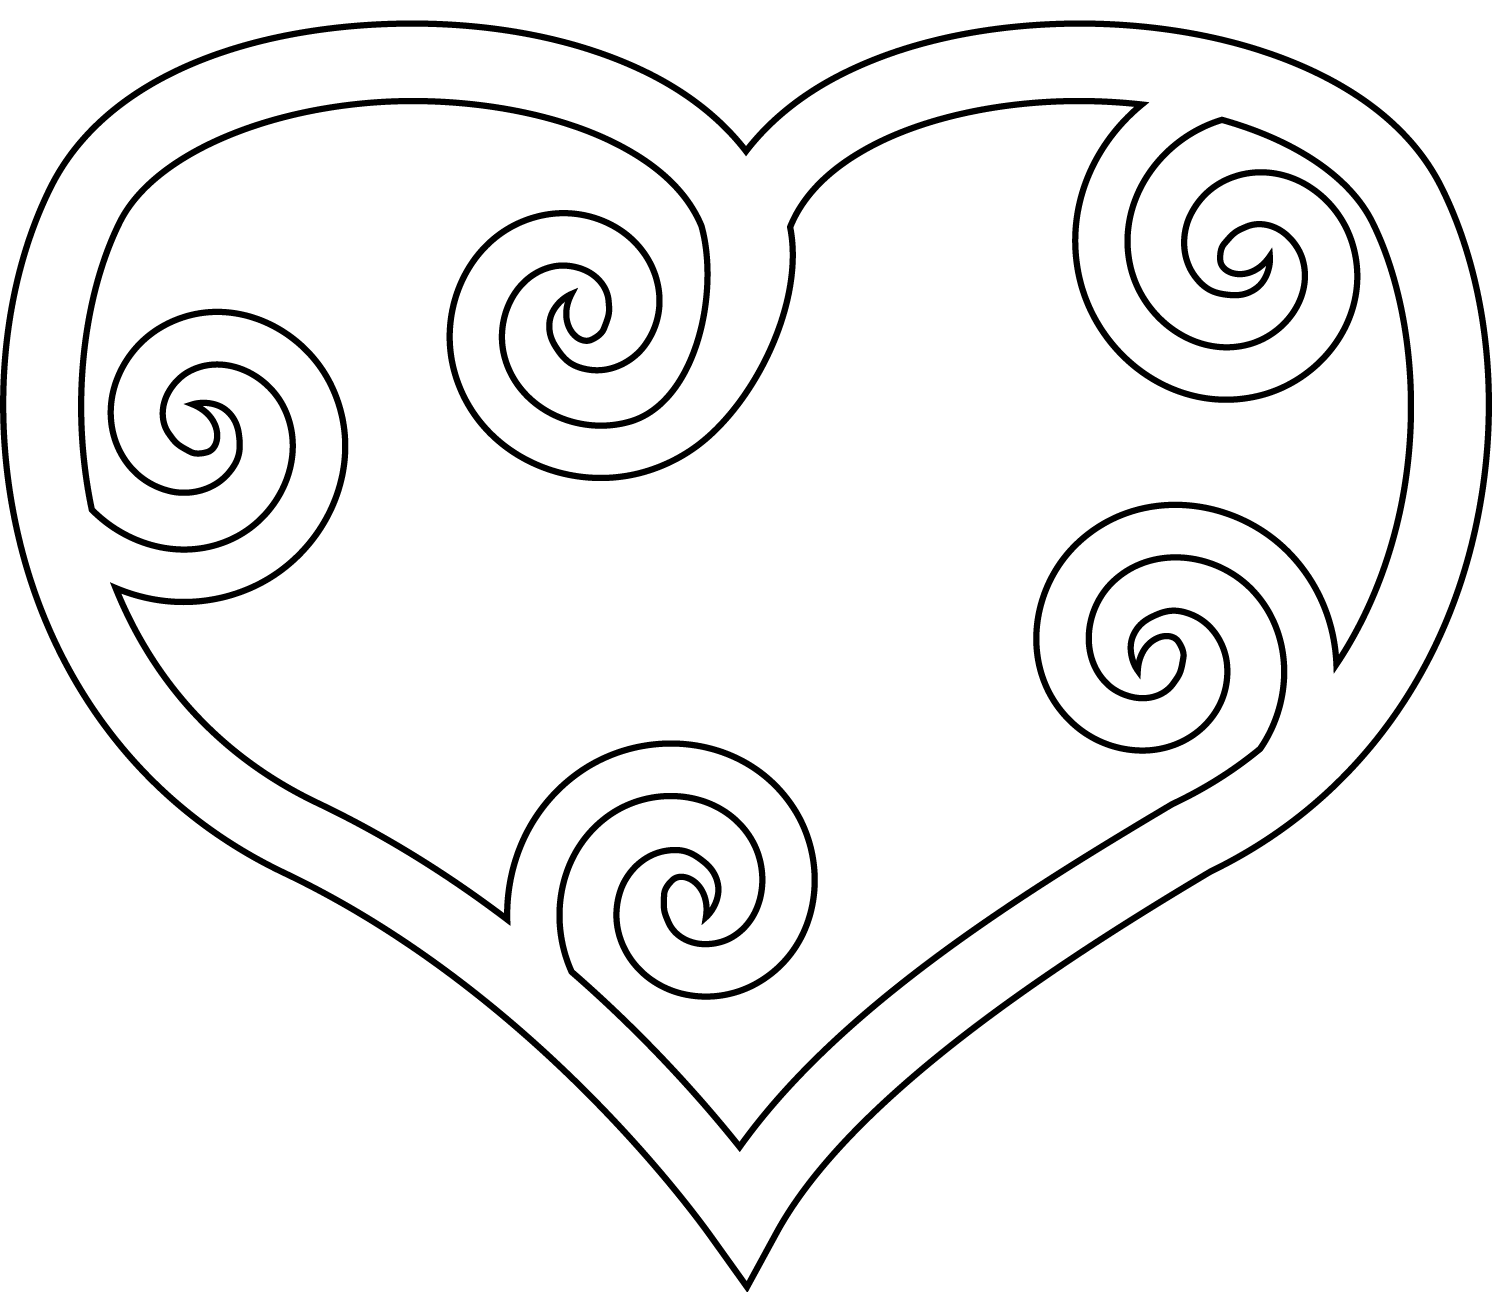 Heart With Maori Swirl Coloring Page